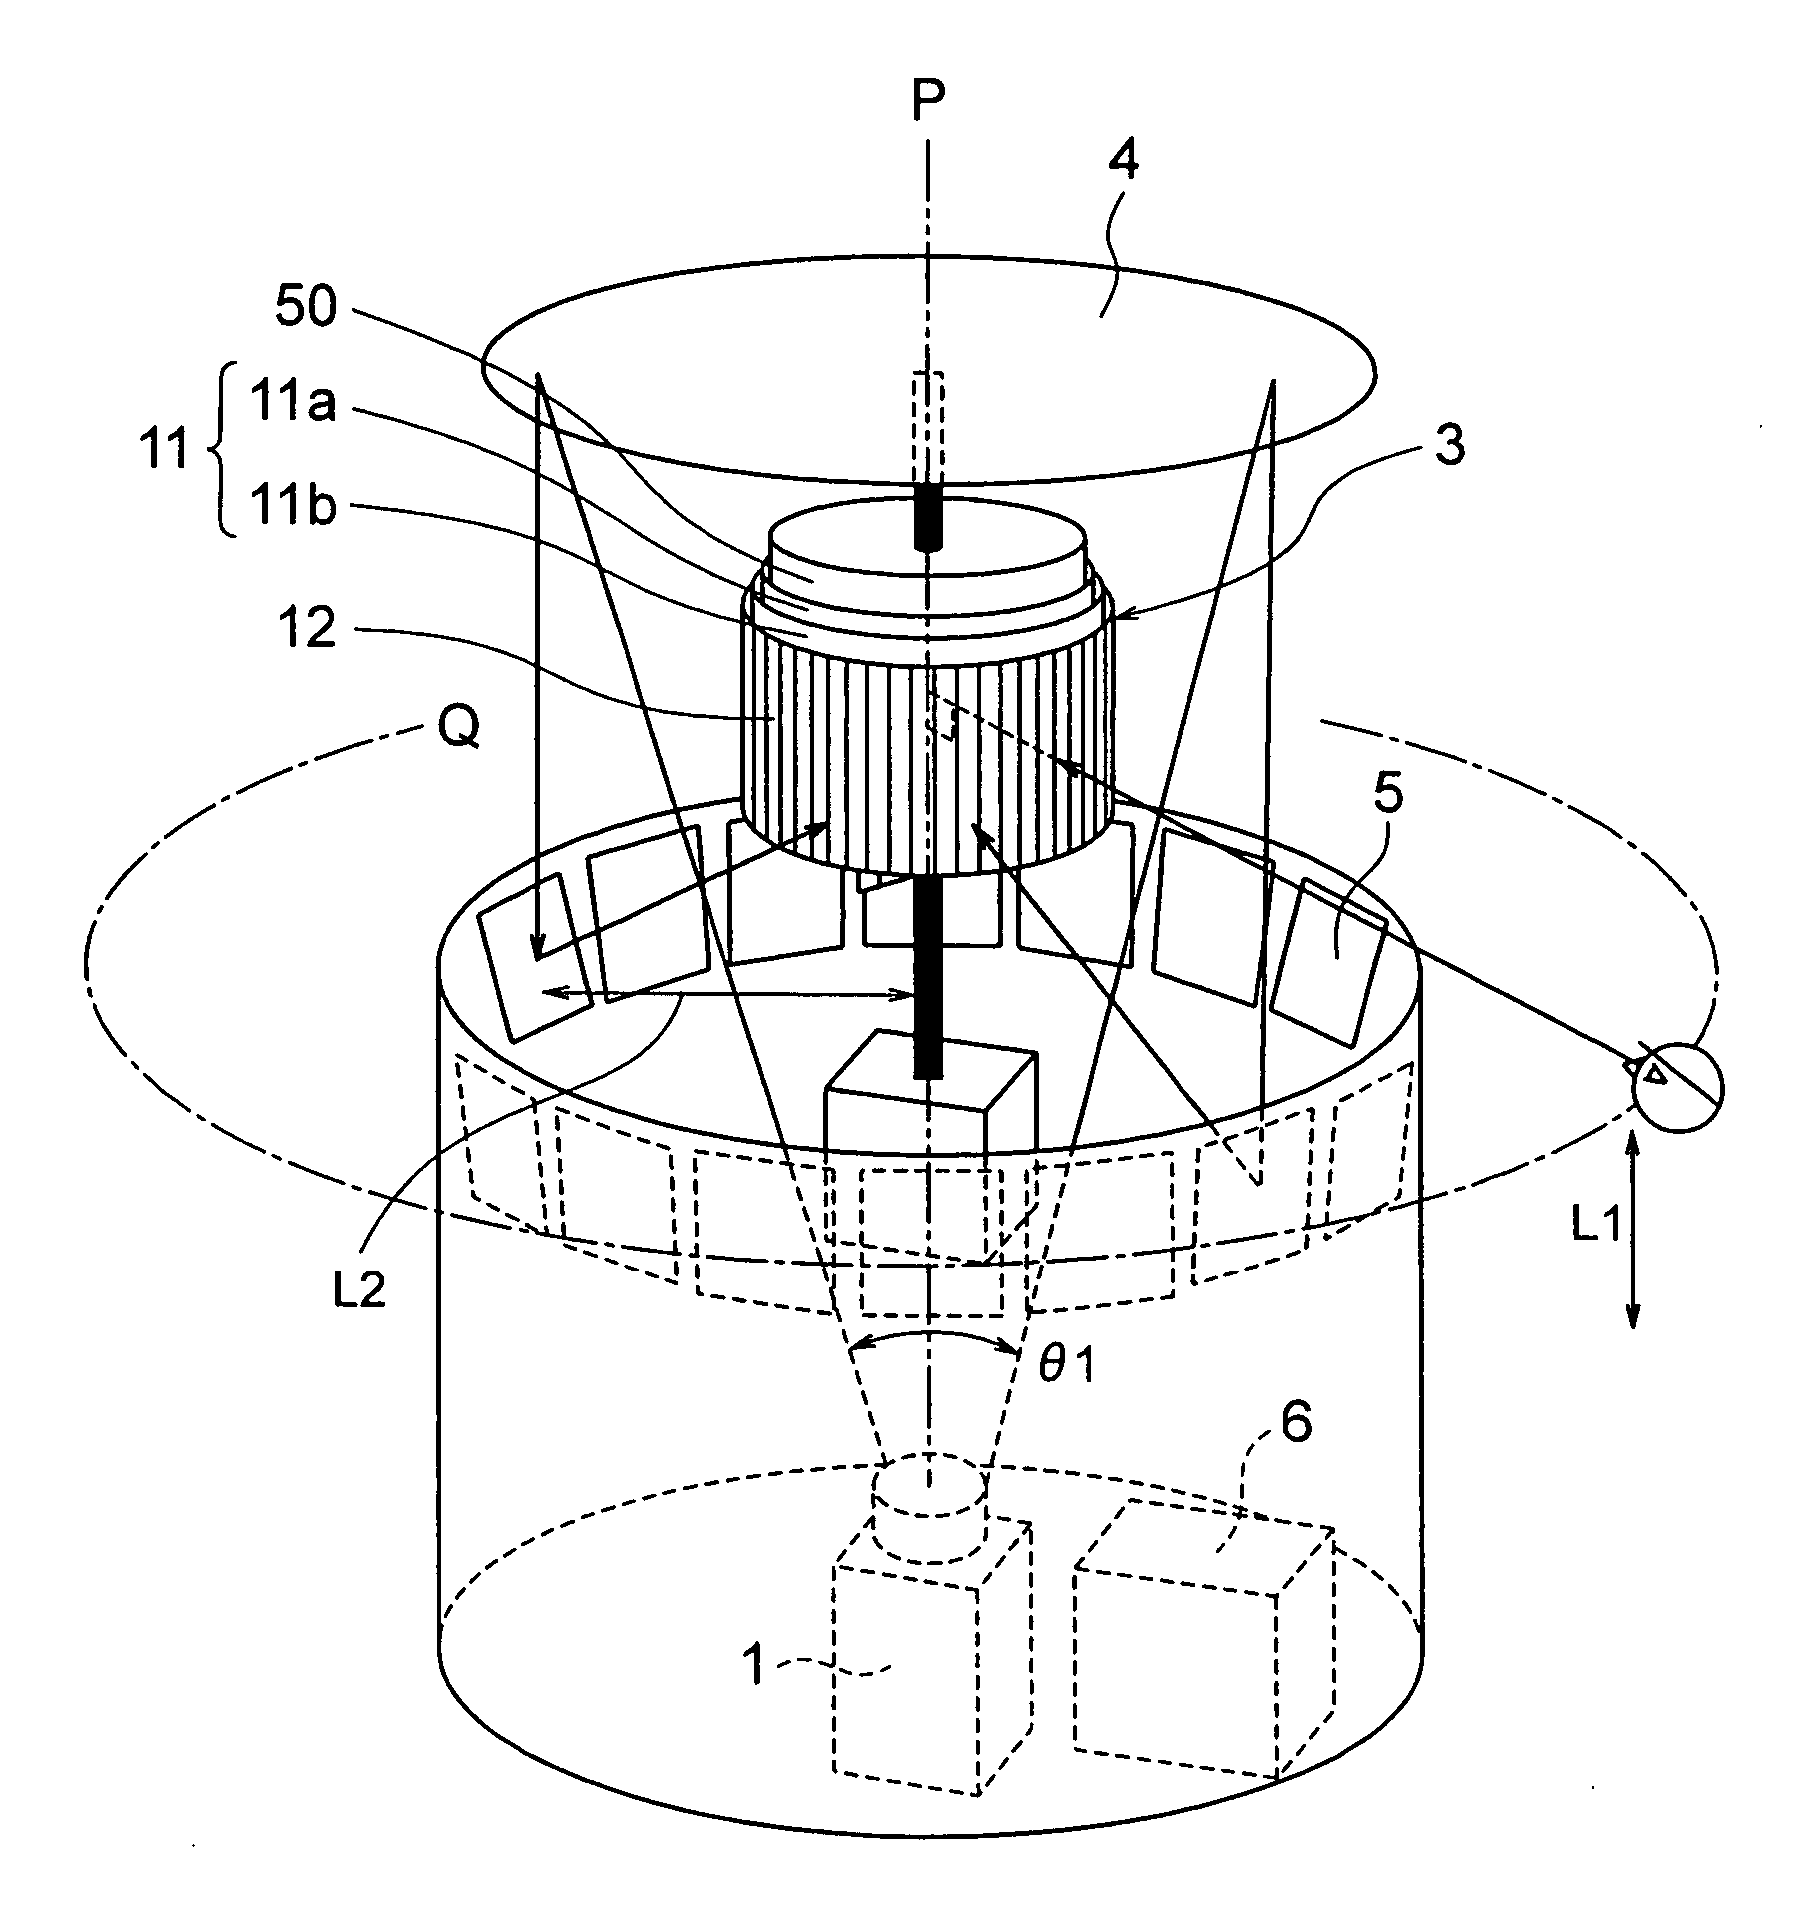 Display System and Camera System